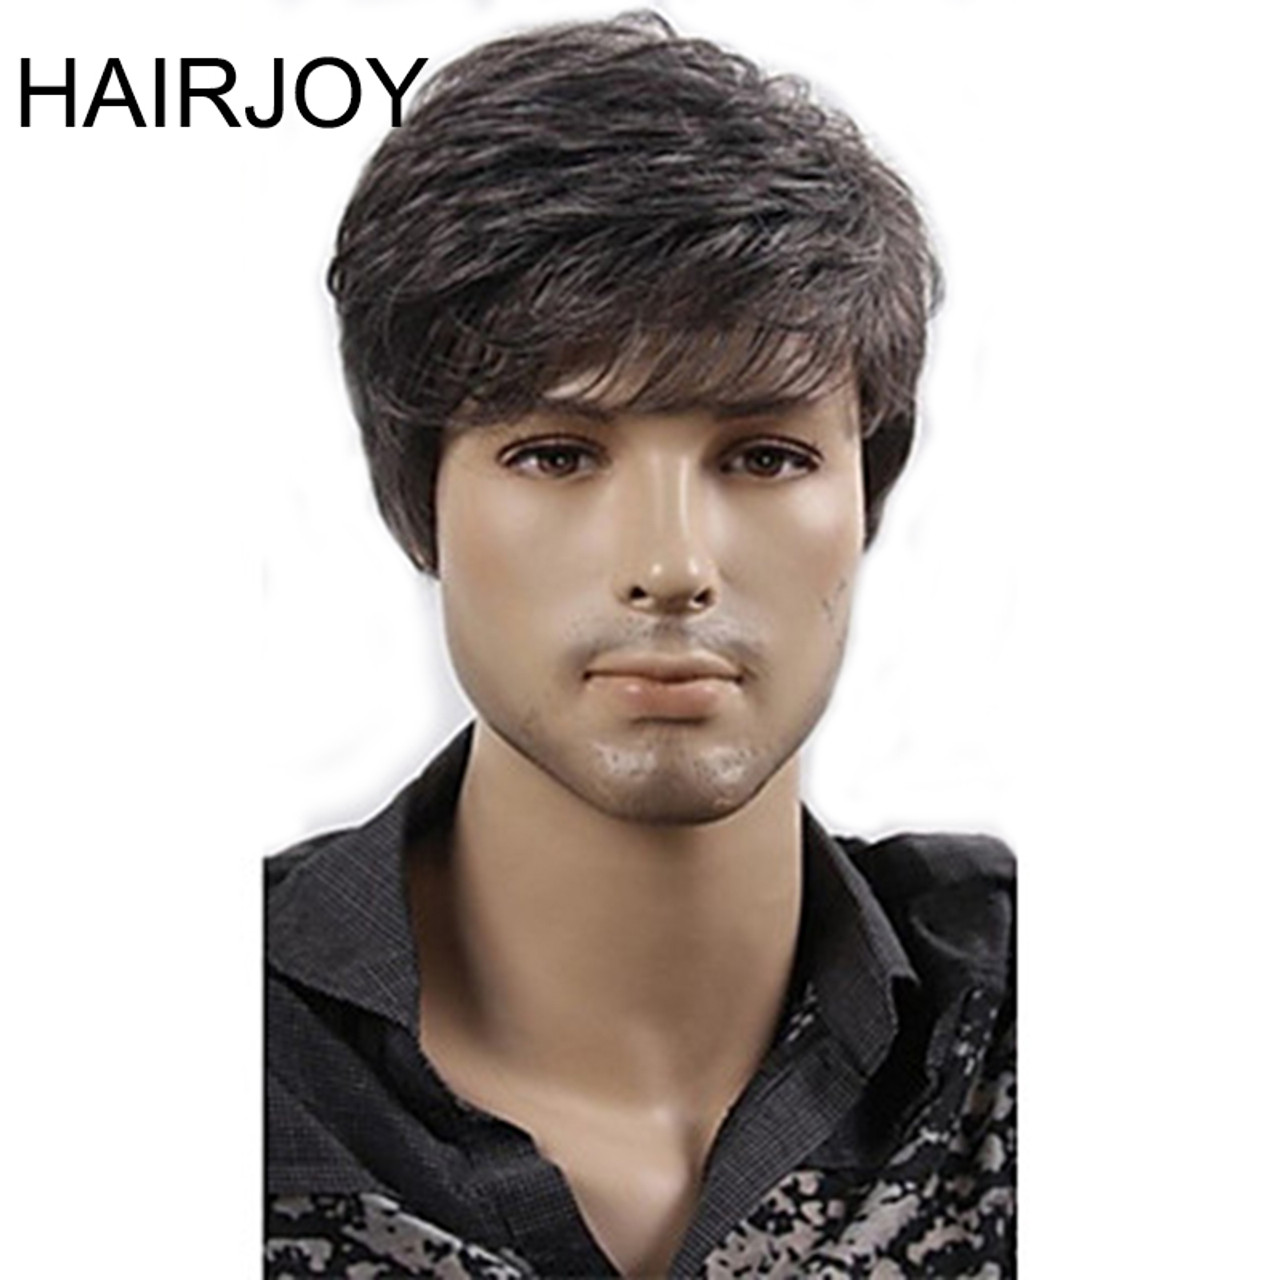 Hairjoy Women Men Synthetic Wig Short Curly Layered Haircut Brown